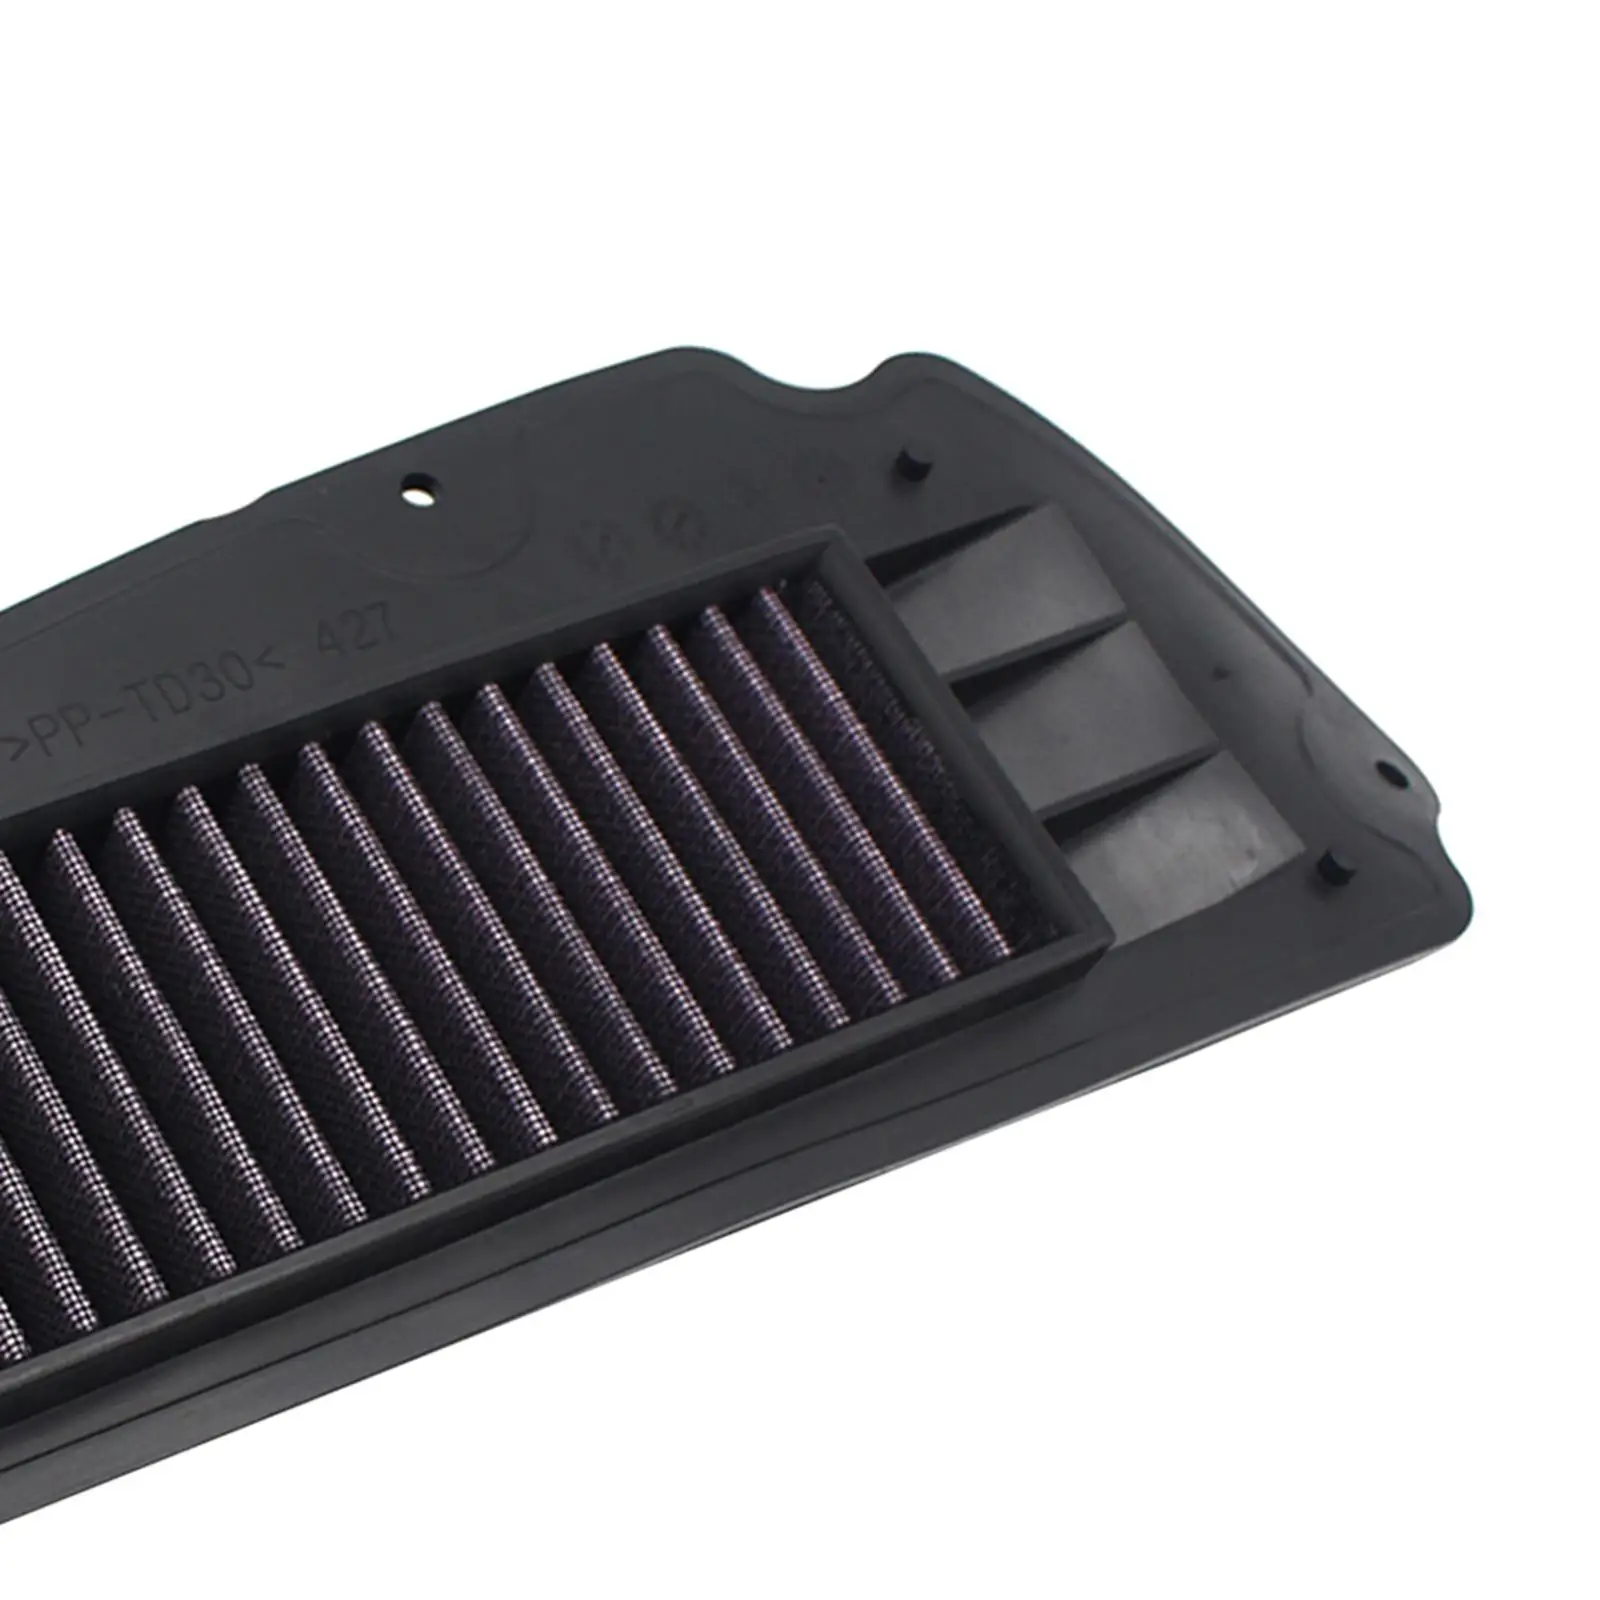  Air Filter Intake Cleaner Assemblies  Replaces  50 21-202 Installation  Parts